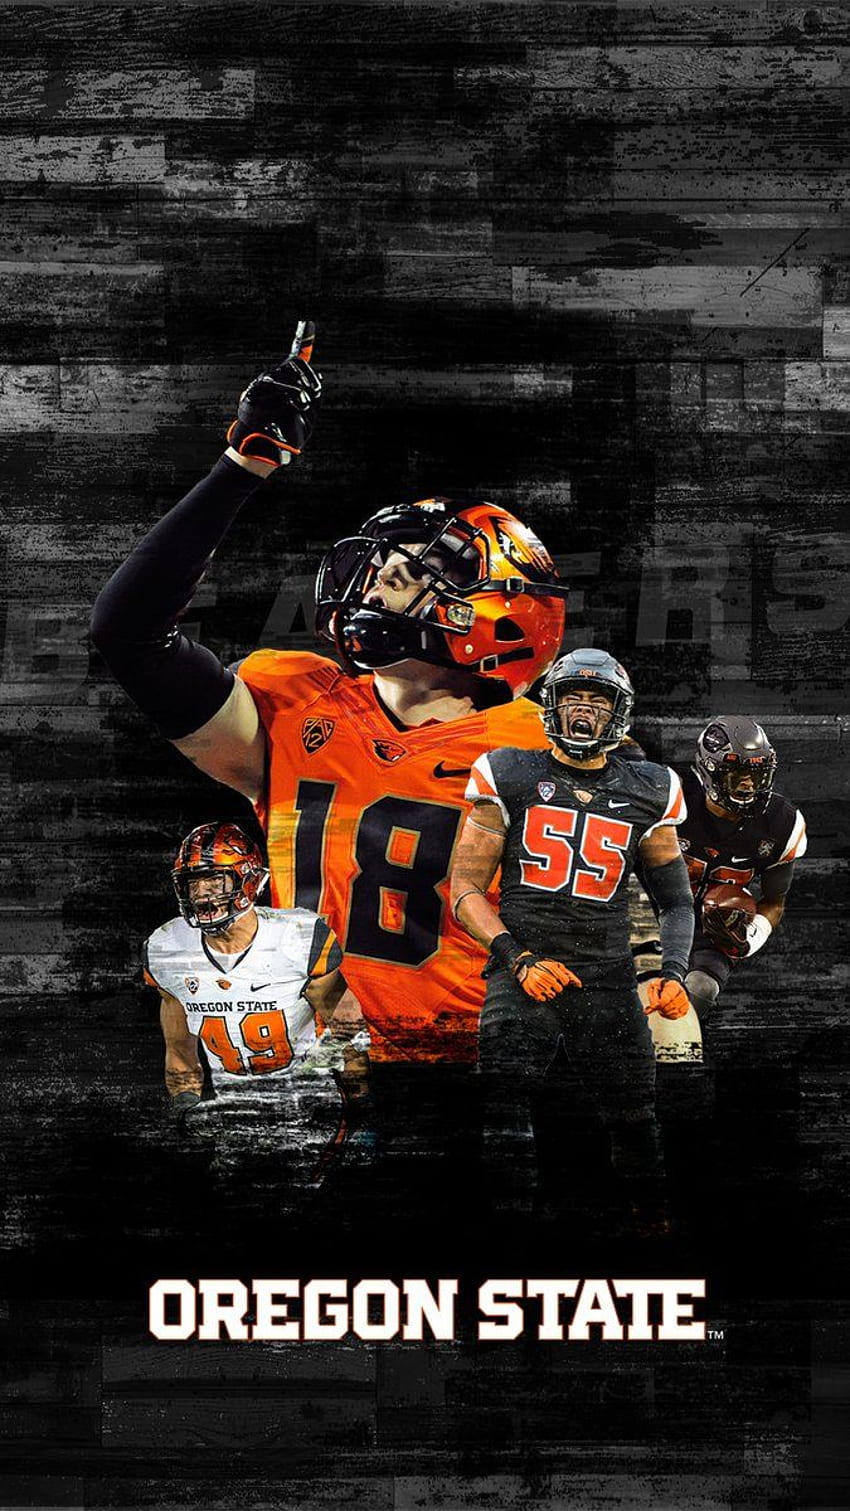 Oregon State Football - Have you ed the Beaver HD phone wallpaper